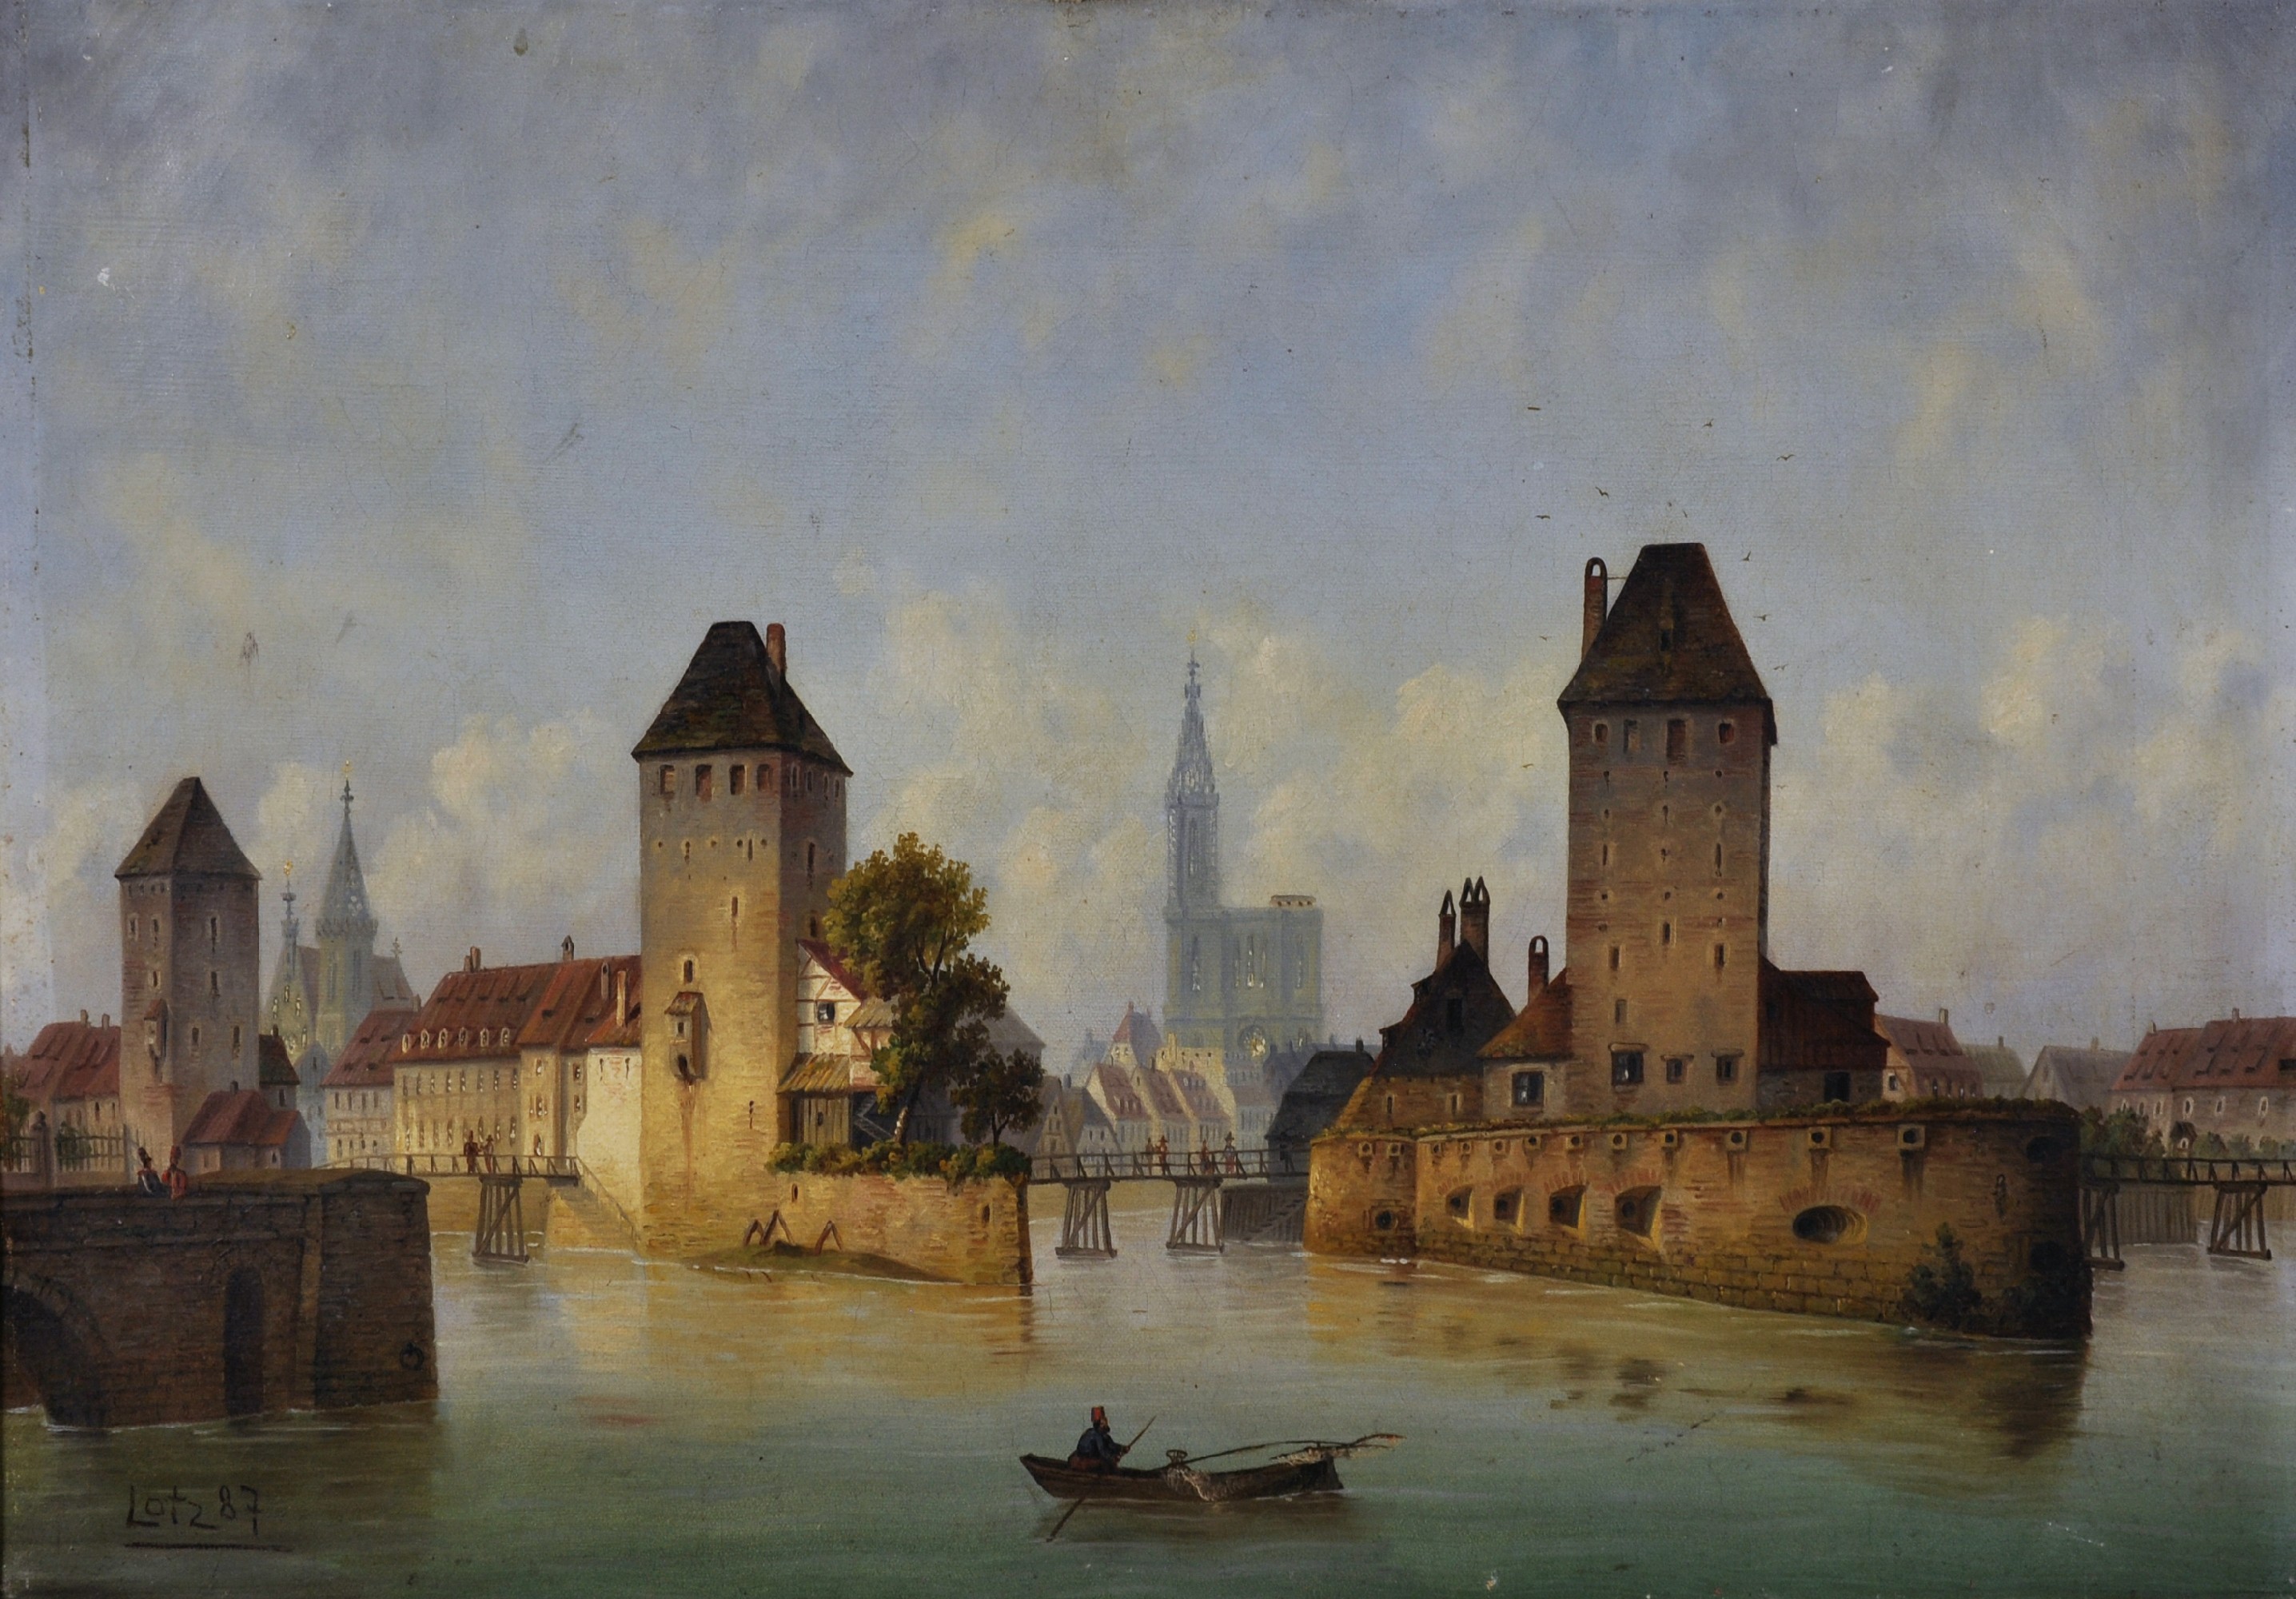 Attributed to Karl Lotz (1833-1904) German. View of a European City from the River, with